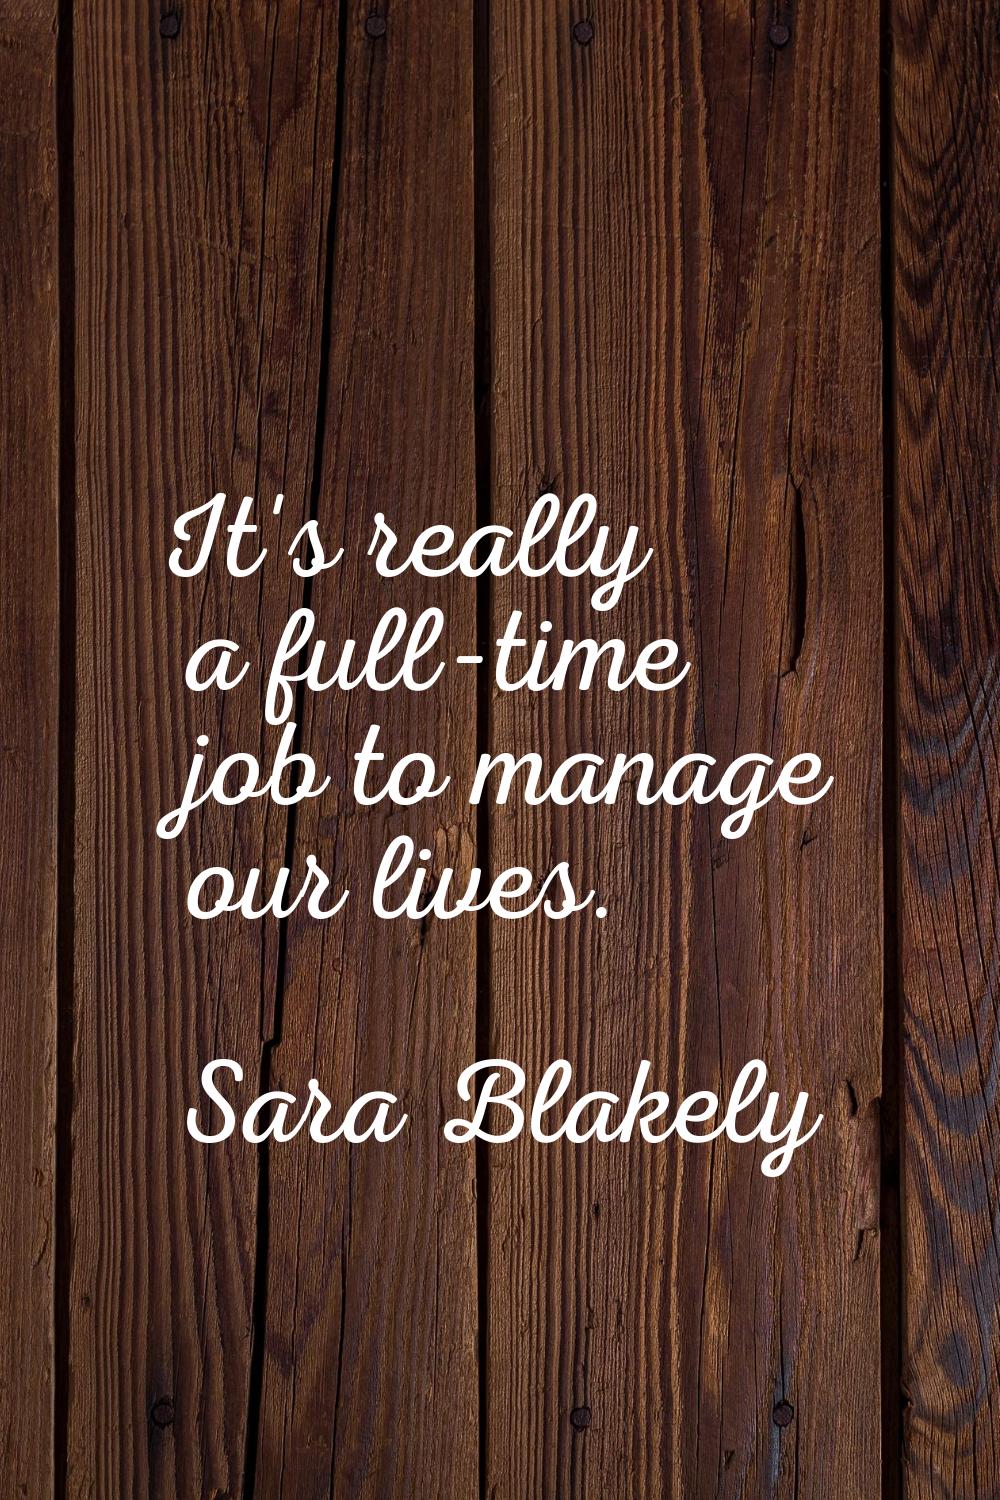 It's really a full-time job to manage our lives.